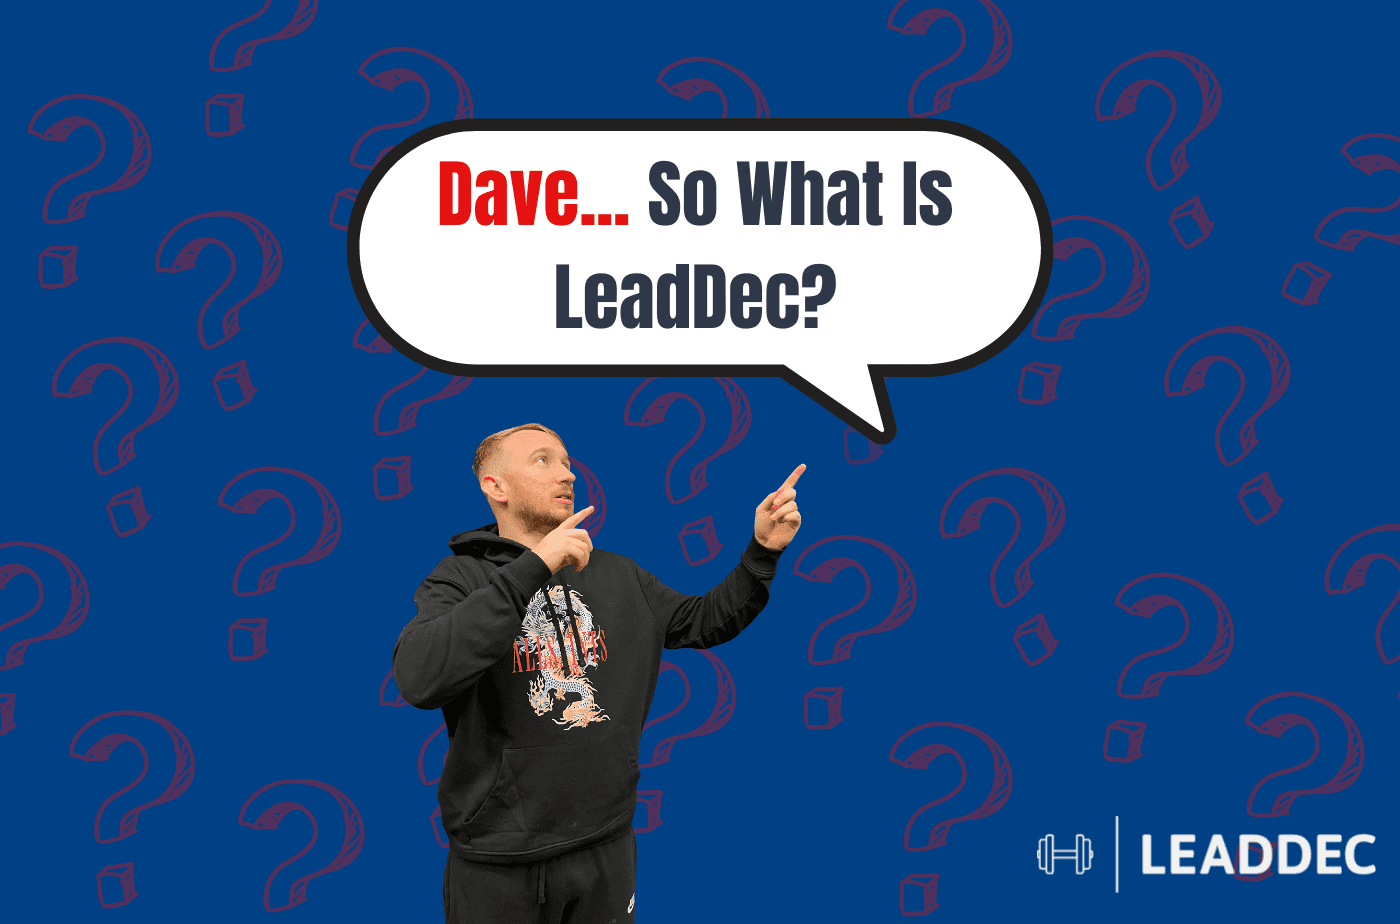 Dave… So what is LeadDec?